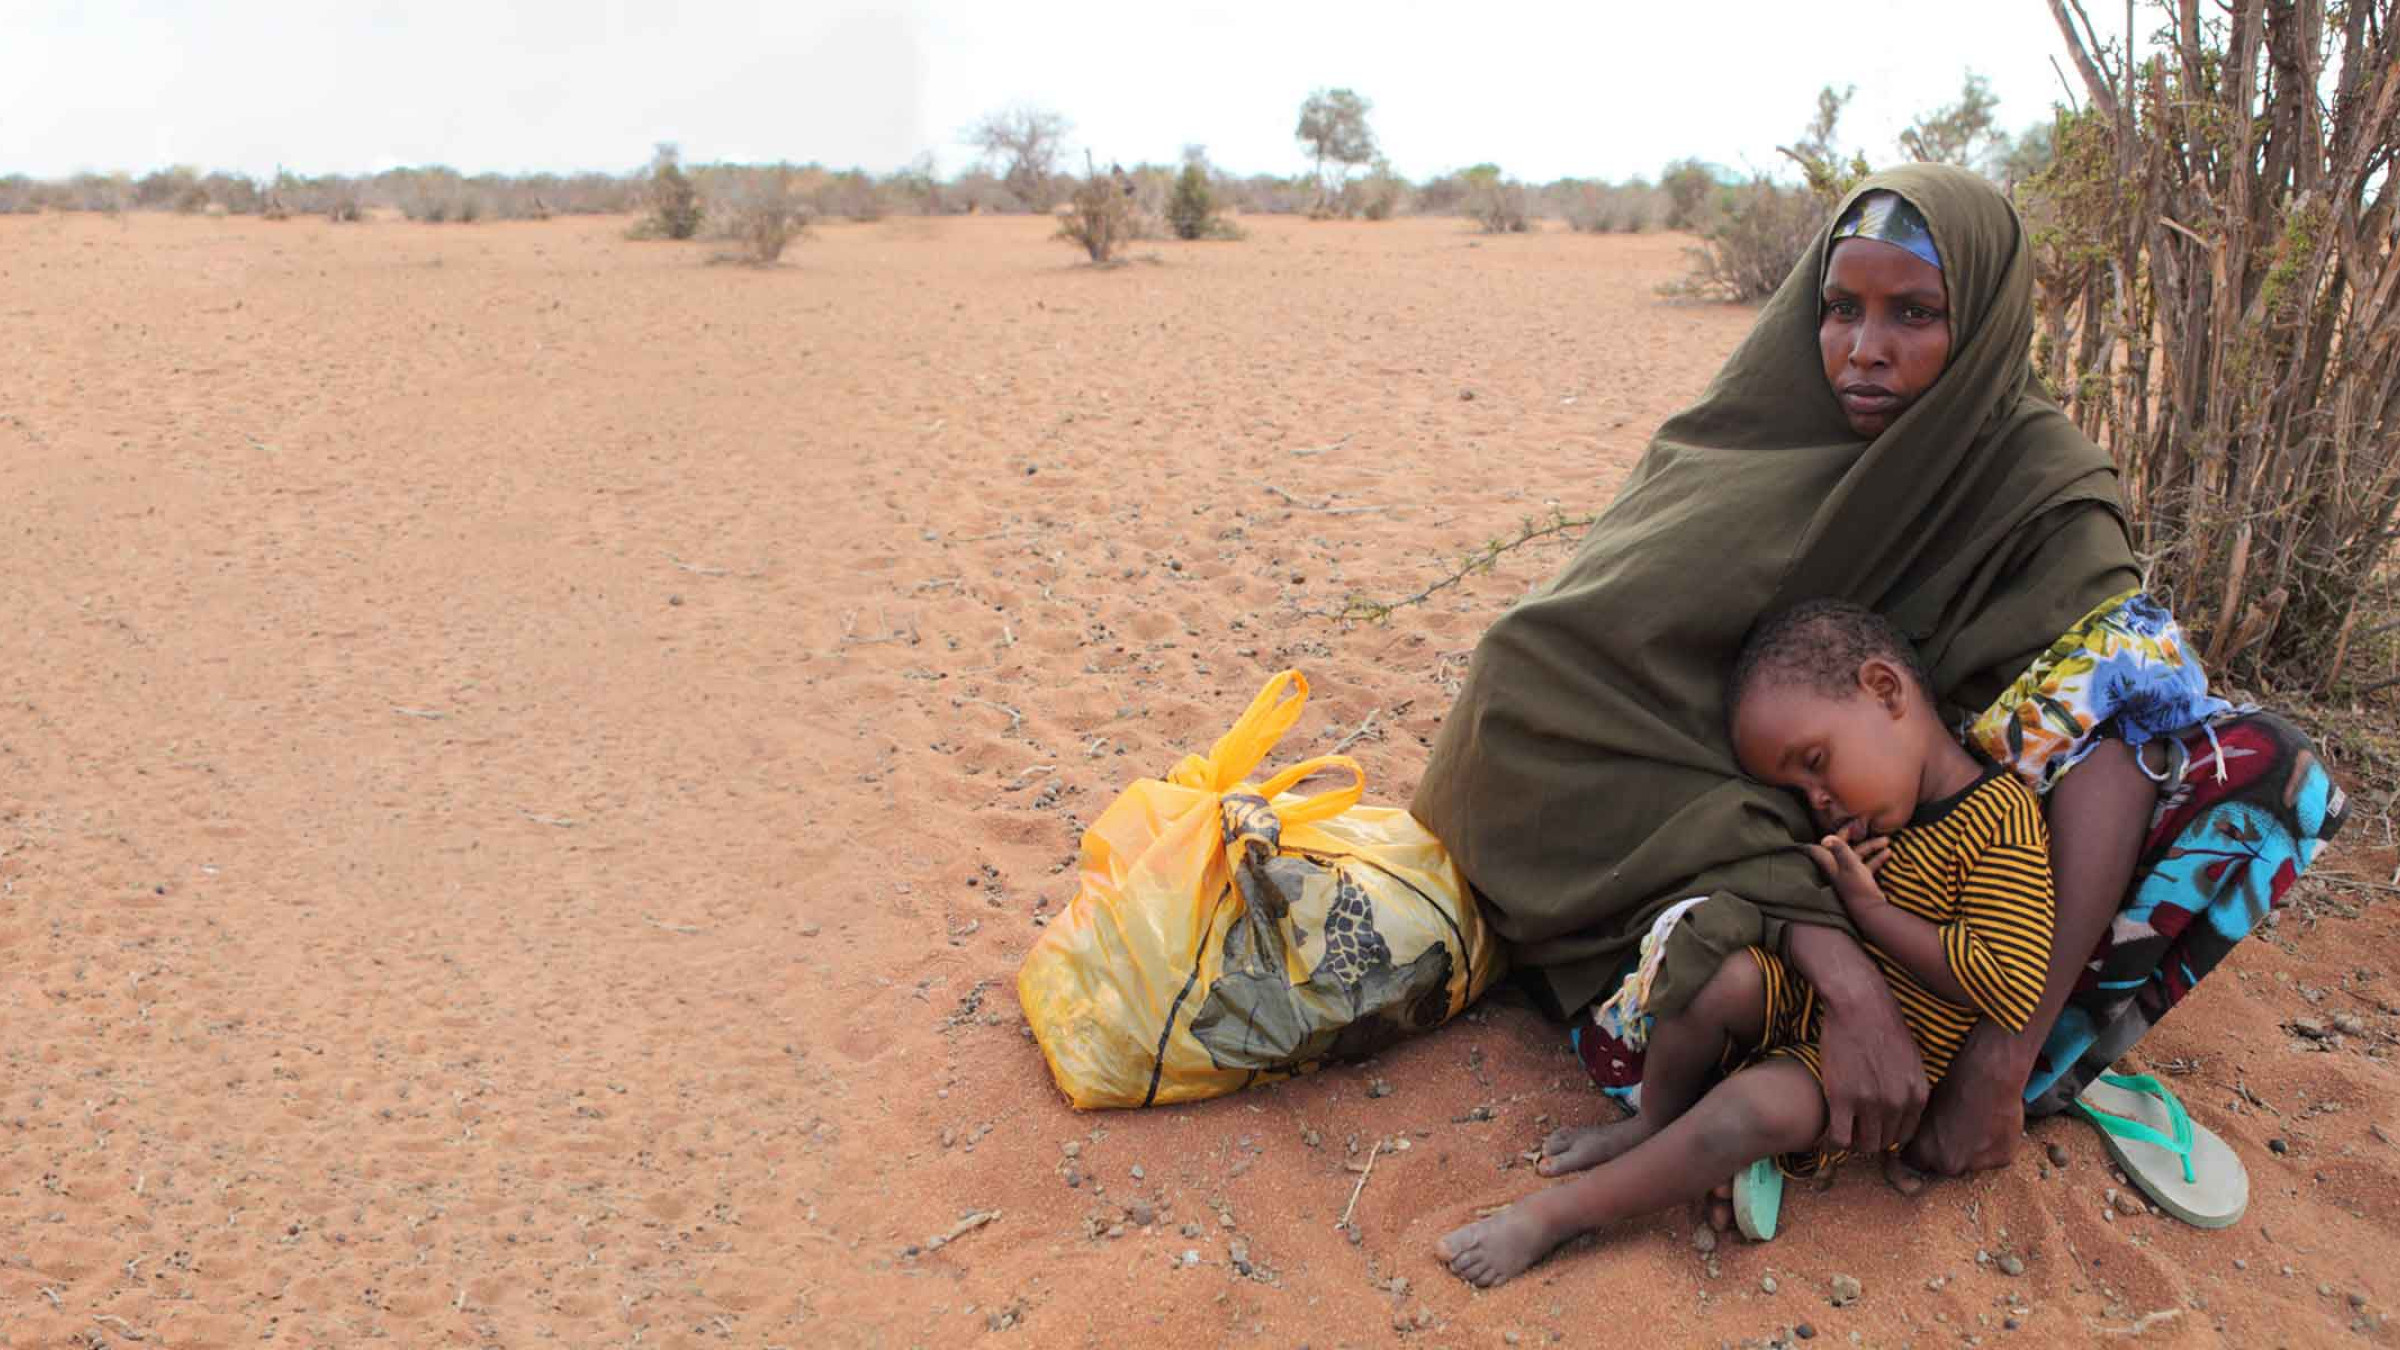 A little boy sleeps on his mother's lap as she rests on the long walk from Somalia to refugee camps in Kenya.